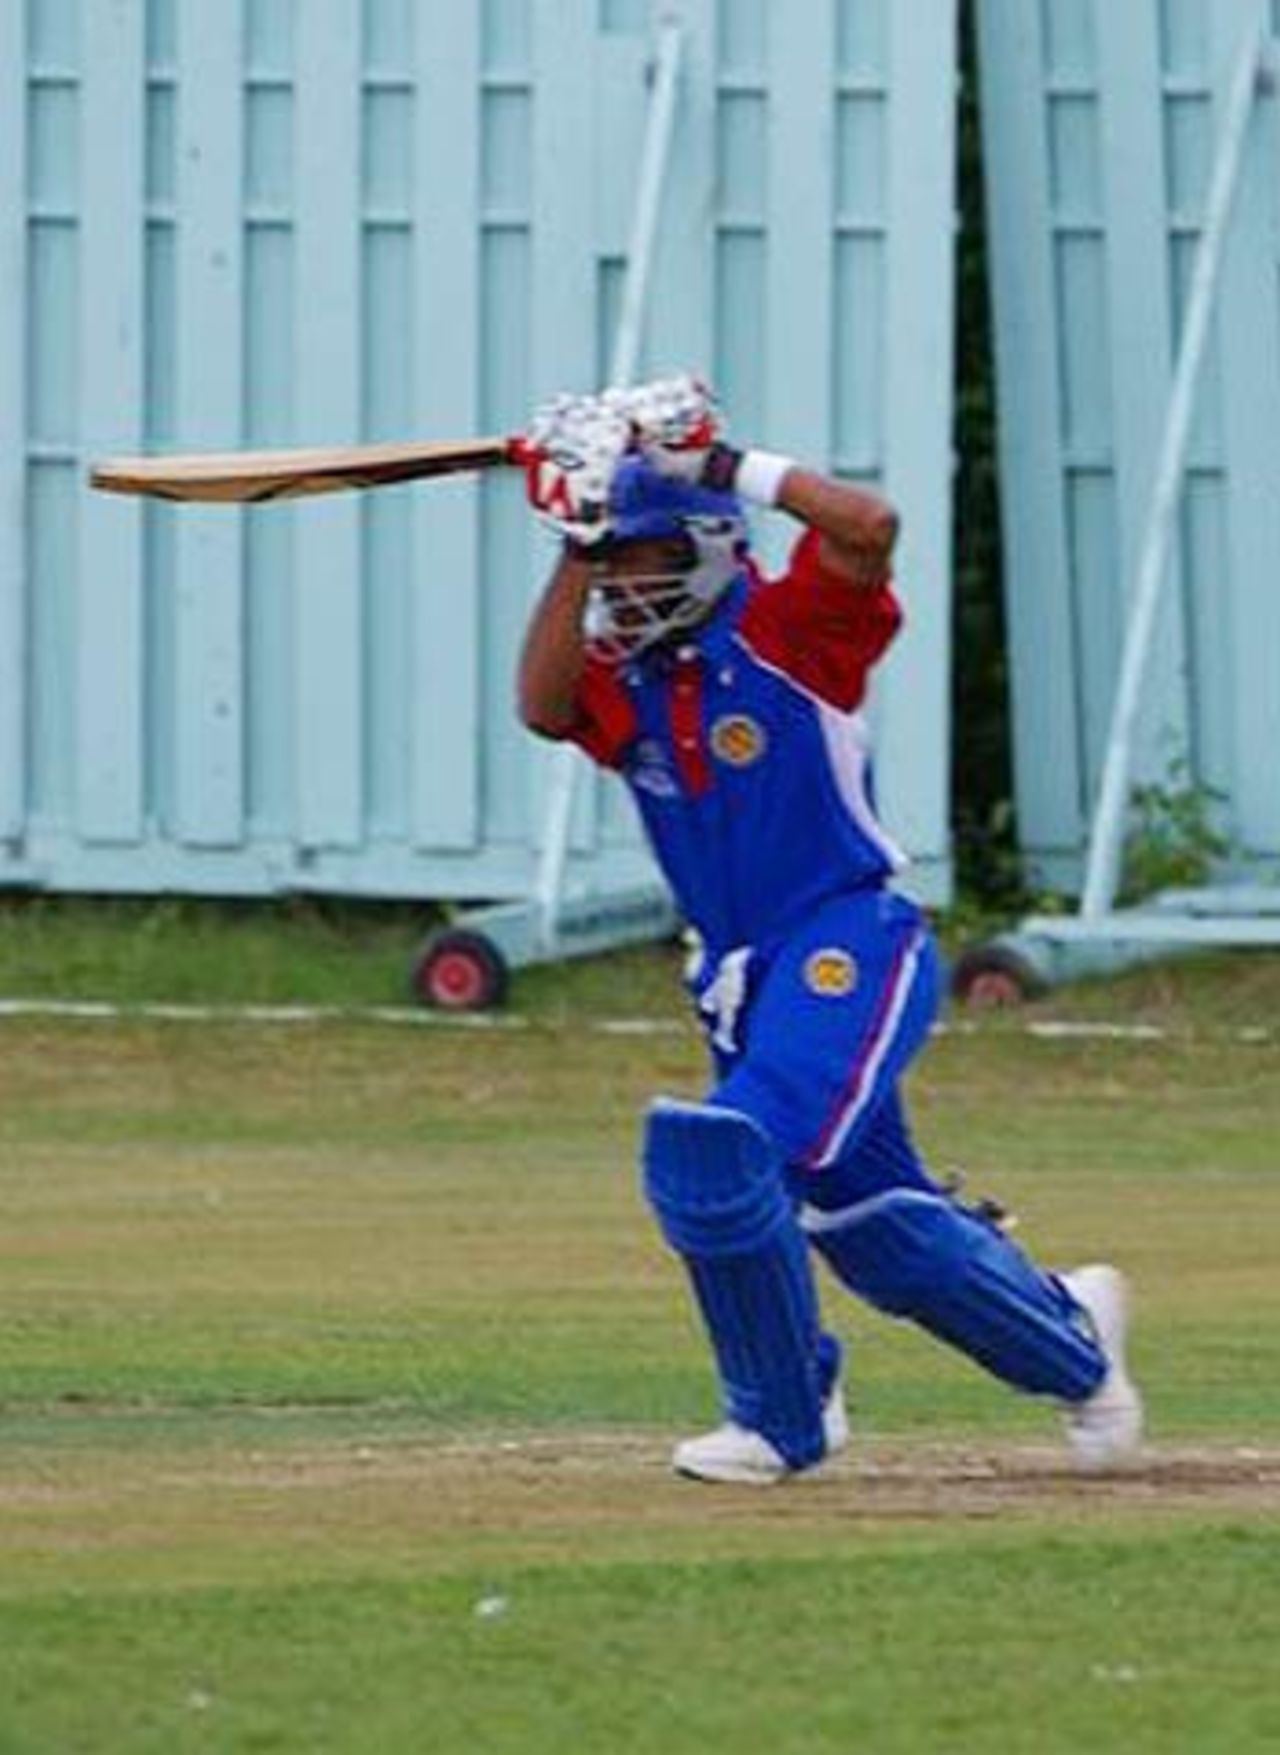 Steve Massiah on his way to 81 against Bermuda, ICC World Cricket League Americas Division, 7th match, King City, Ontario